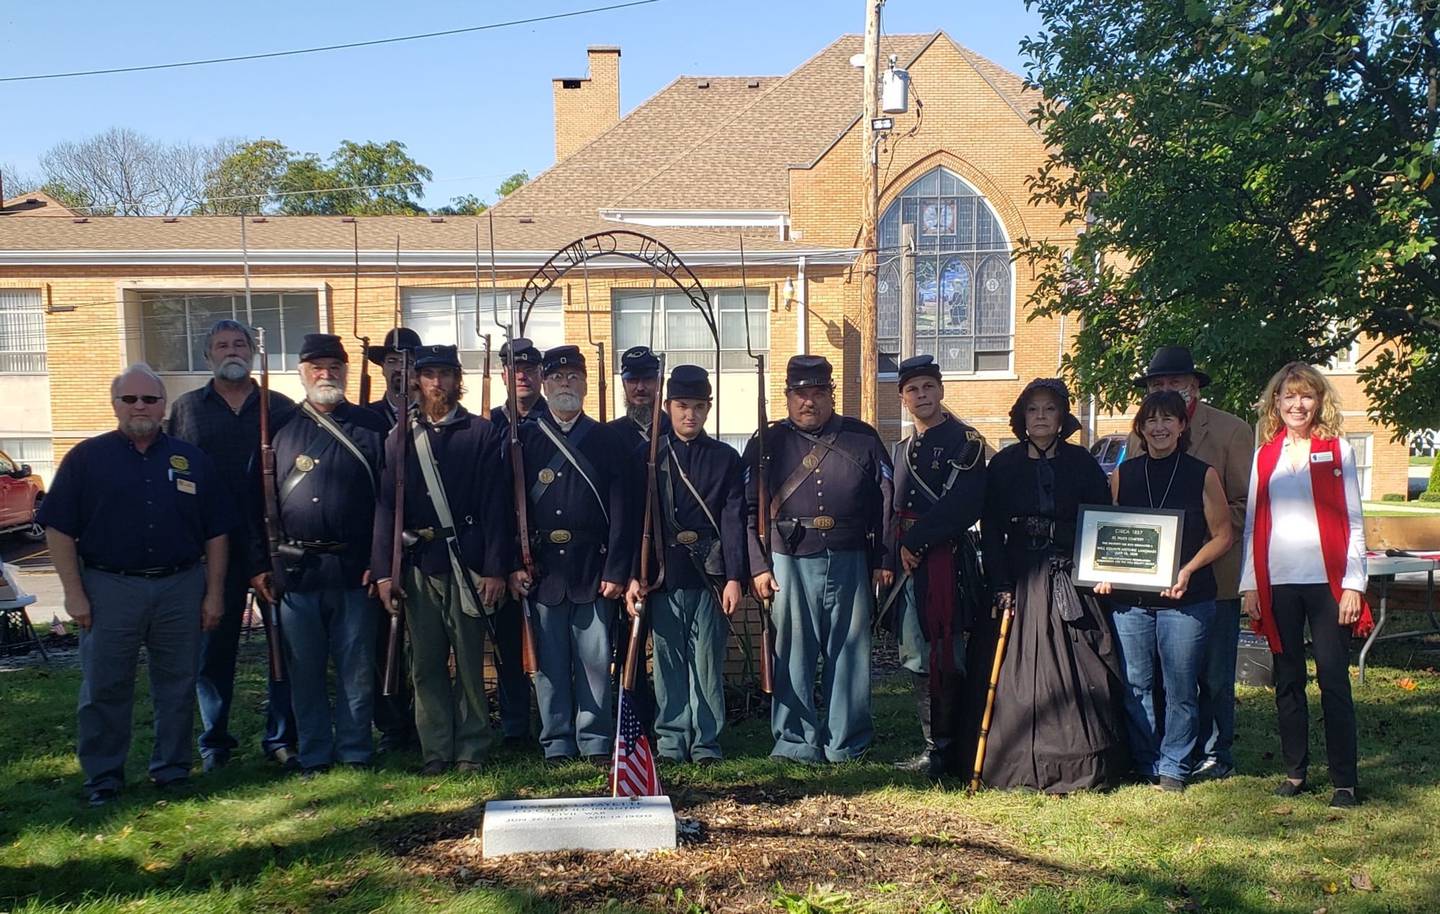 On Oct. 9, members of the 100th Illinois Volunteer Infantry, Co. K. reenactors showed their respects to the Civil War veterans buried in St. Paul’s Cemetery in Monee, which was recently placed on the register of historic places in Will County.